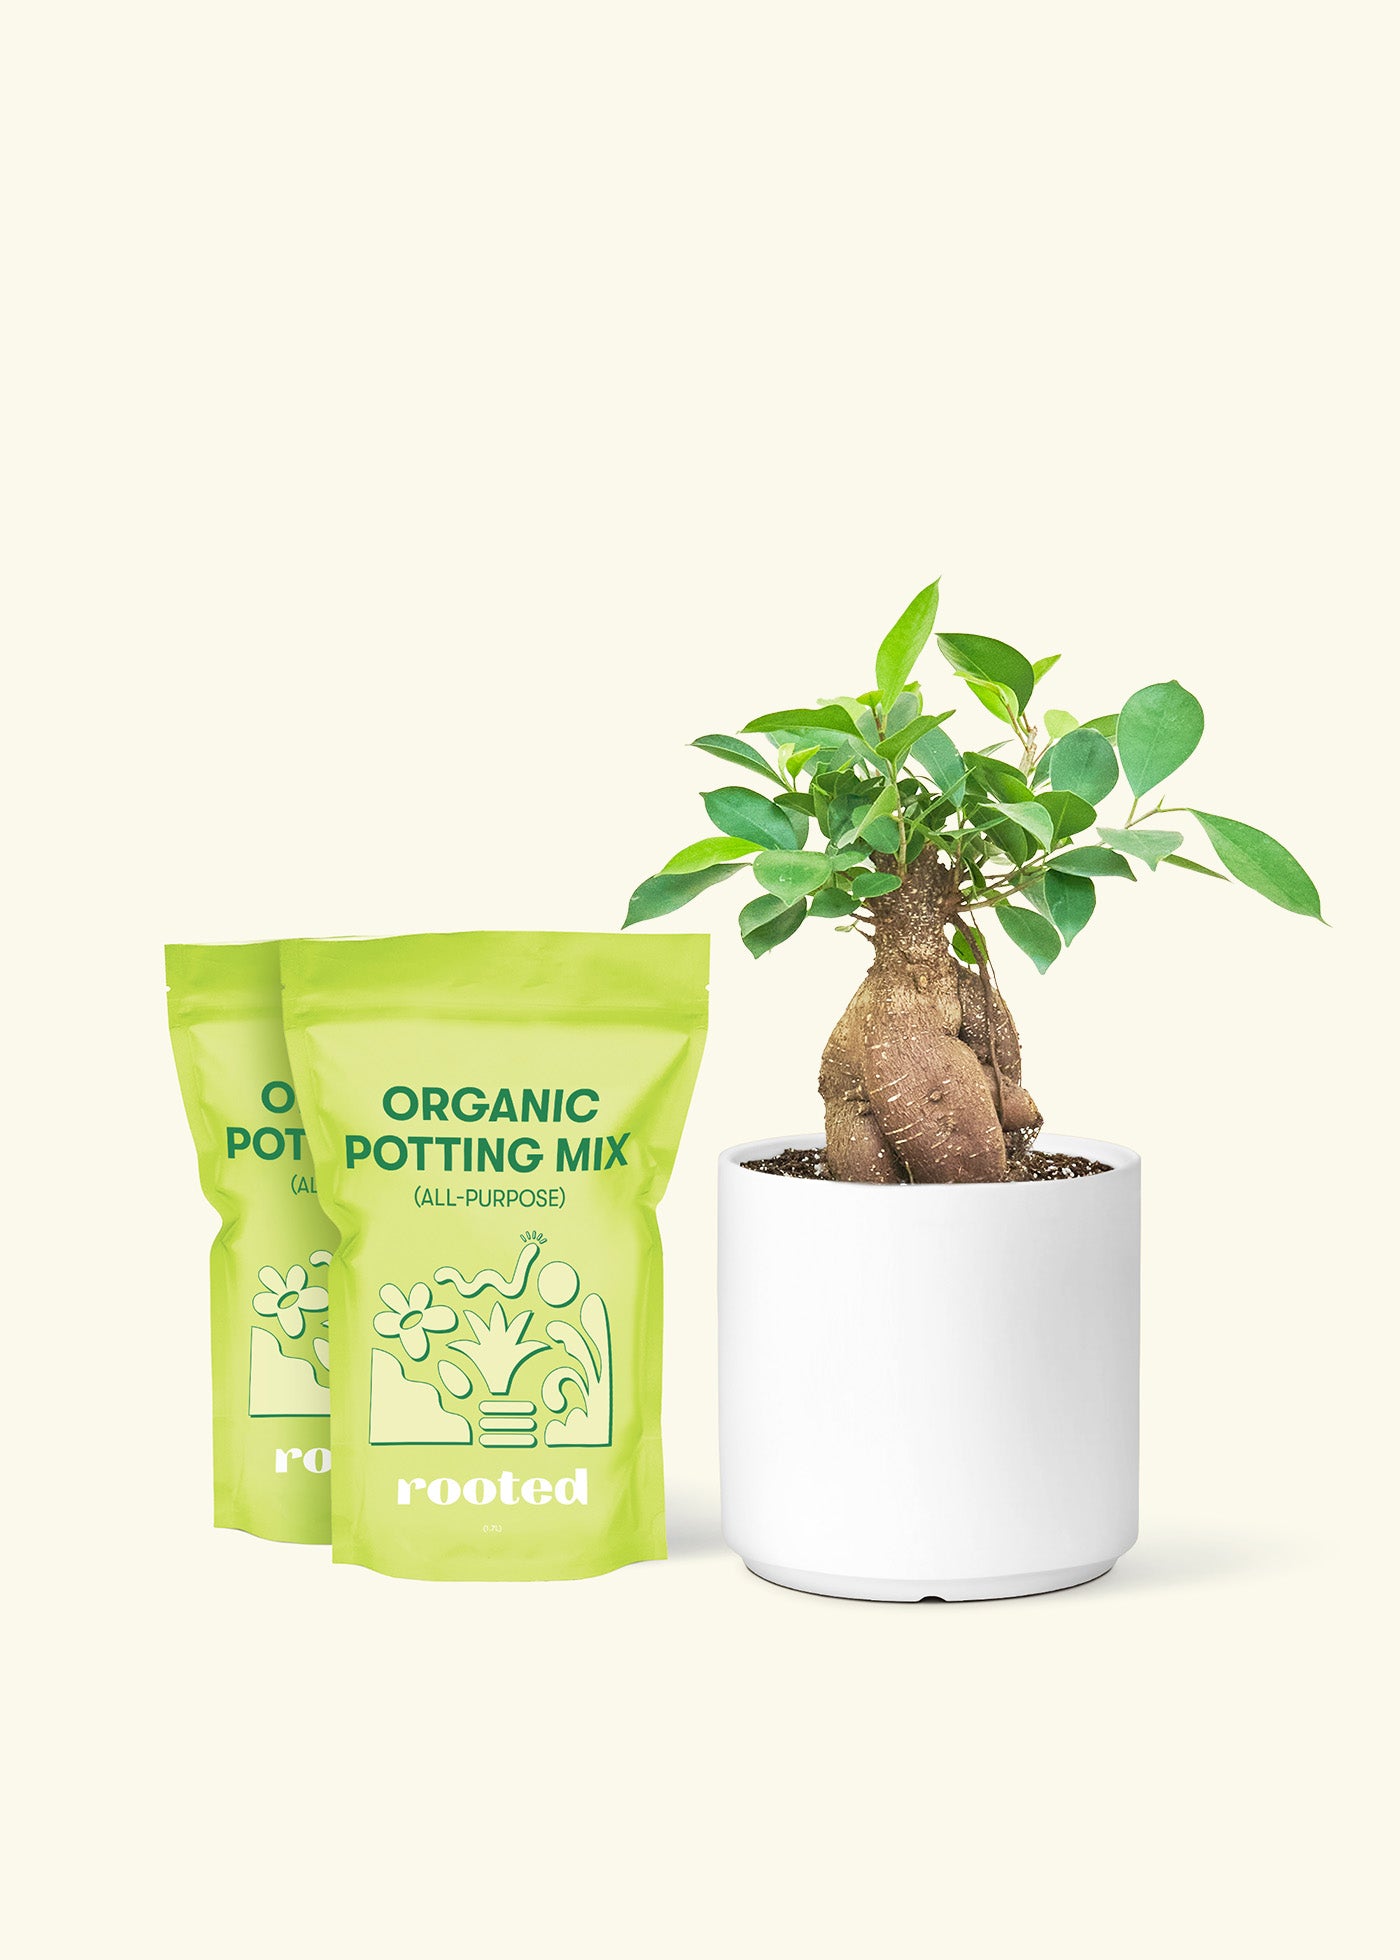 Medium Ficus 'Ginseng' in a white cylinder pot and 2 bags of soil.